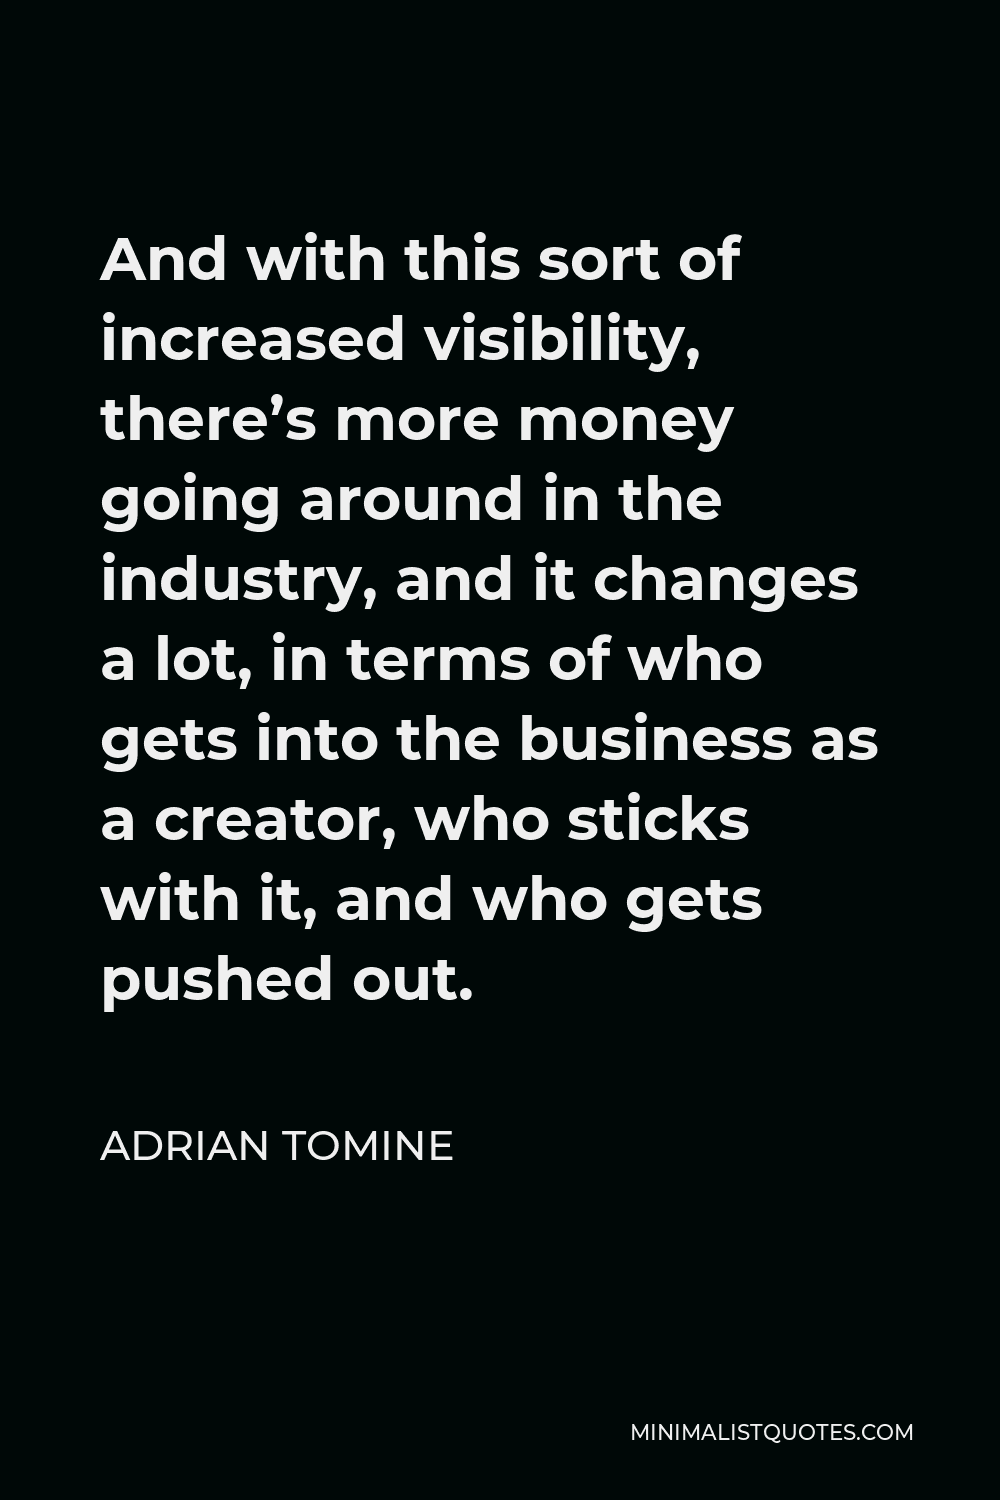 Adrian Tomine Quote - And with this sort of increased visibility, there’s more money going around in the industry, and it changes a lot, in terms of who gets into the business as a creator, who sticks with it, and who gets pushed out.